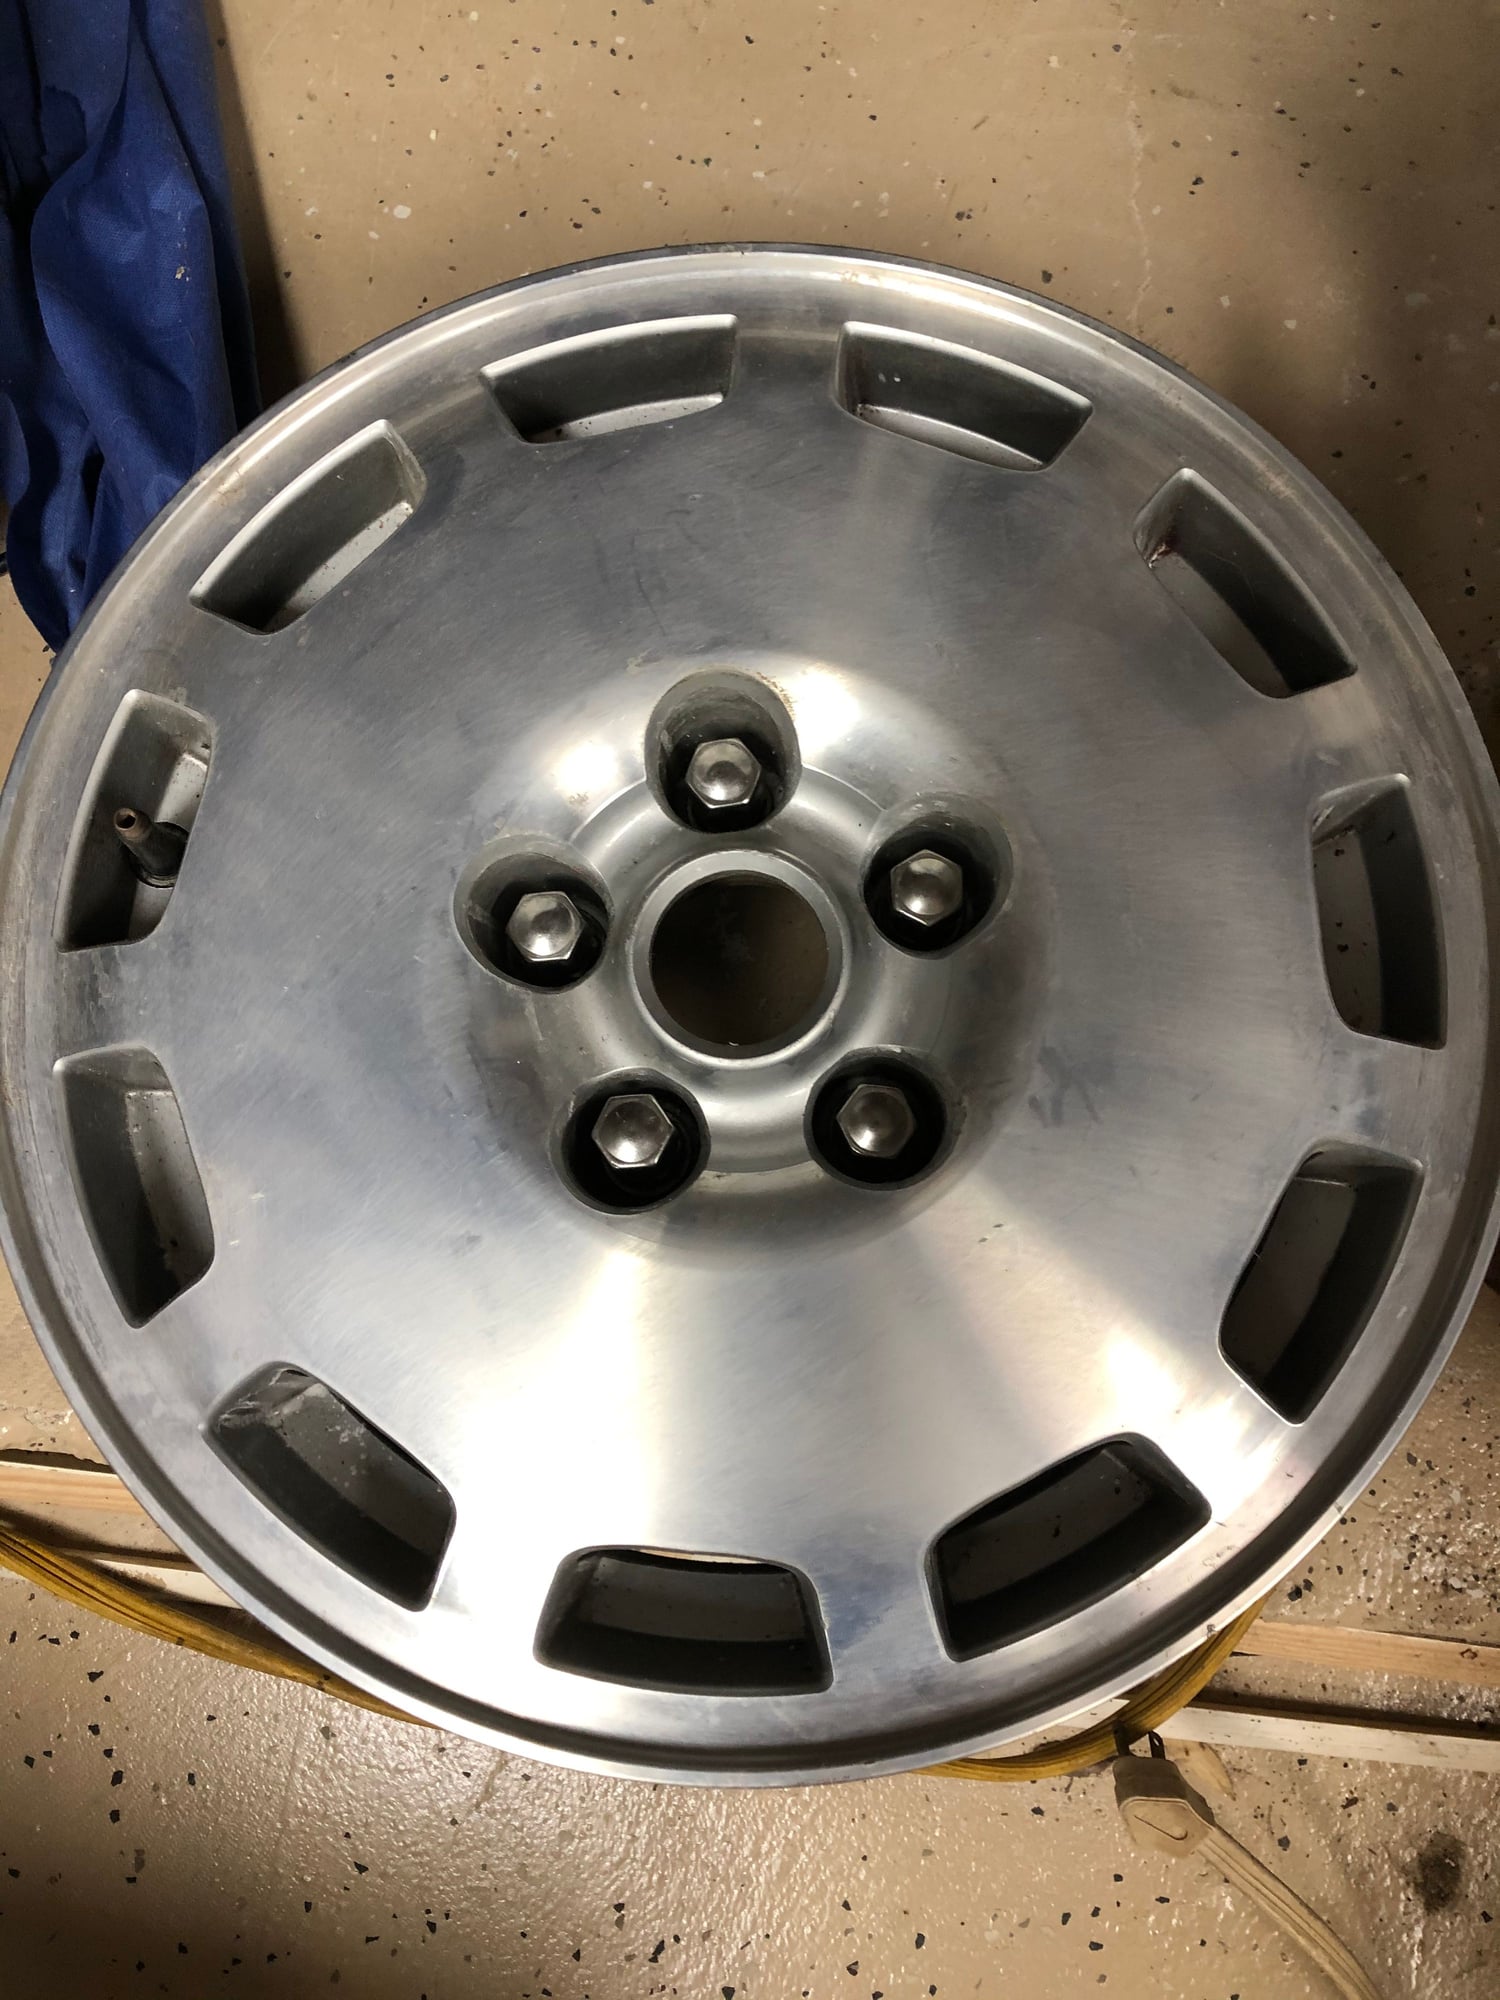 Wheels and Tires/Axles - Original spare rim from ‘96 XJS - Used - 1994 to 1996 Jaguar XJS - Houston, TX 77063, United States